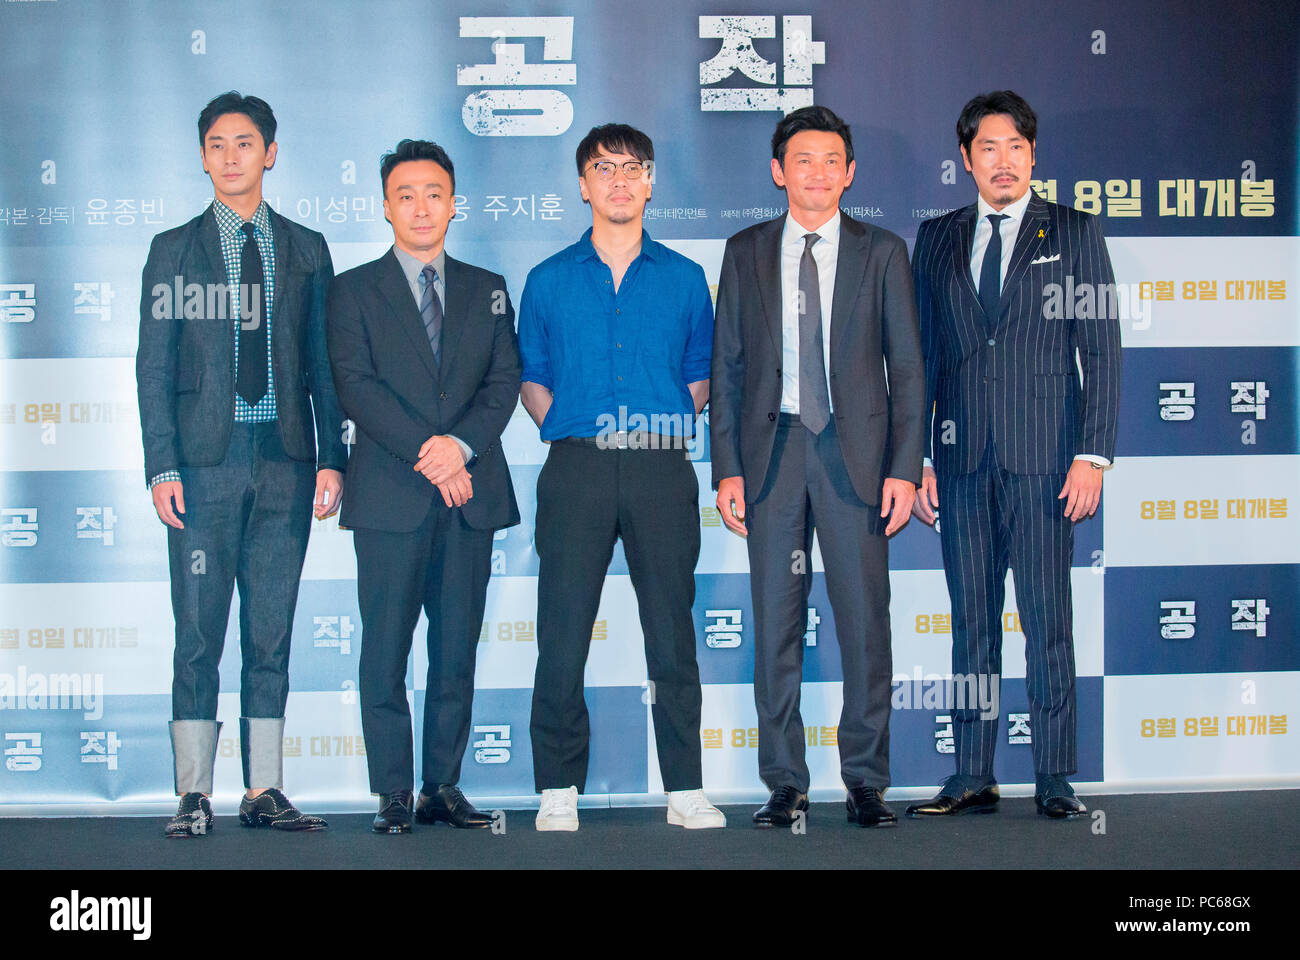 Ju Ji-Hoon, Lee Sung-Min, Yoon Jong-Bin, Hwang Jung-Min and Cho Jin-Woong, July 31, 2018 : South Korean film director Yoon Jong-Bin (C) poses with cast members Ju Ji-Hoon (L), Lee Sung-Min (2nd L), Hwang Jung-Min (2nd R) and Cho Jin-Woong (R) at a press conference for their new film 'The Spy Gone North' at a theatre in Seoul, South Korea. The spy film tells the story of a South Korean spy who goes undercover as a businessman in North Korea in the 1990s to infiltrate North's nuclear facilities using the codename 'Black Venus'. Credit: Lee Jae-Won/AFLO/Alamy Live News Stock Photo